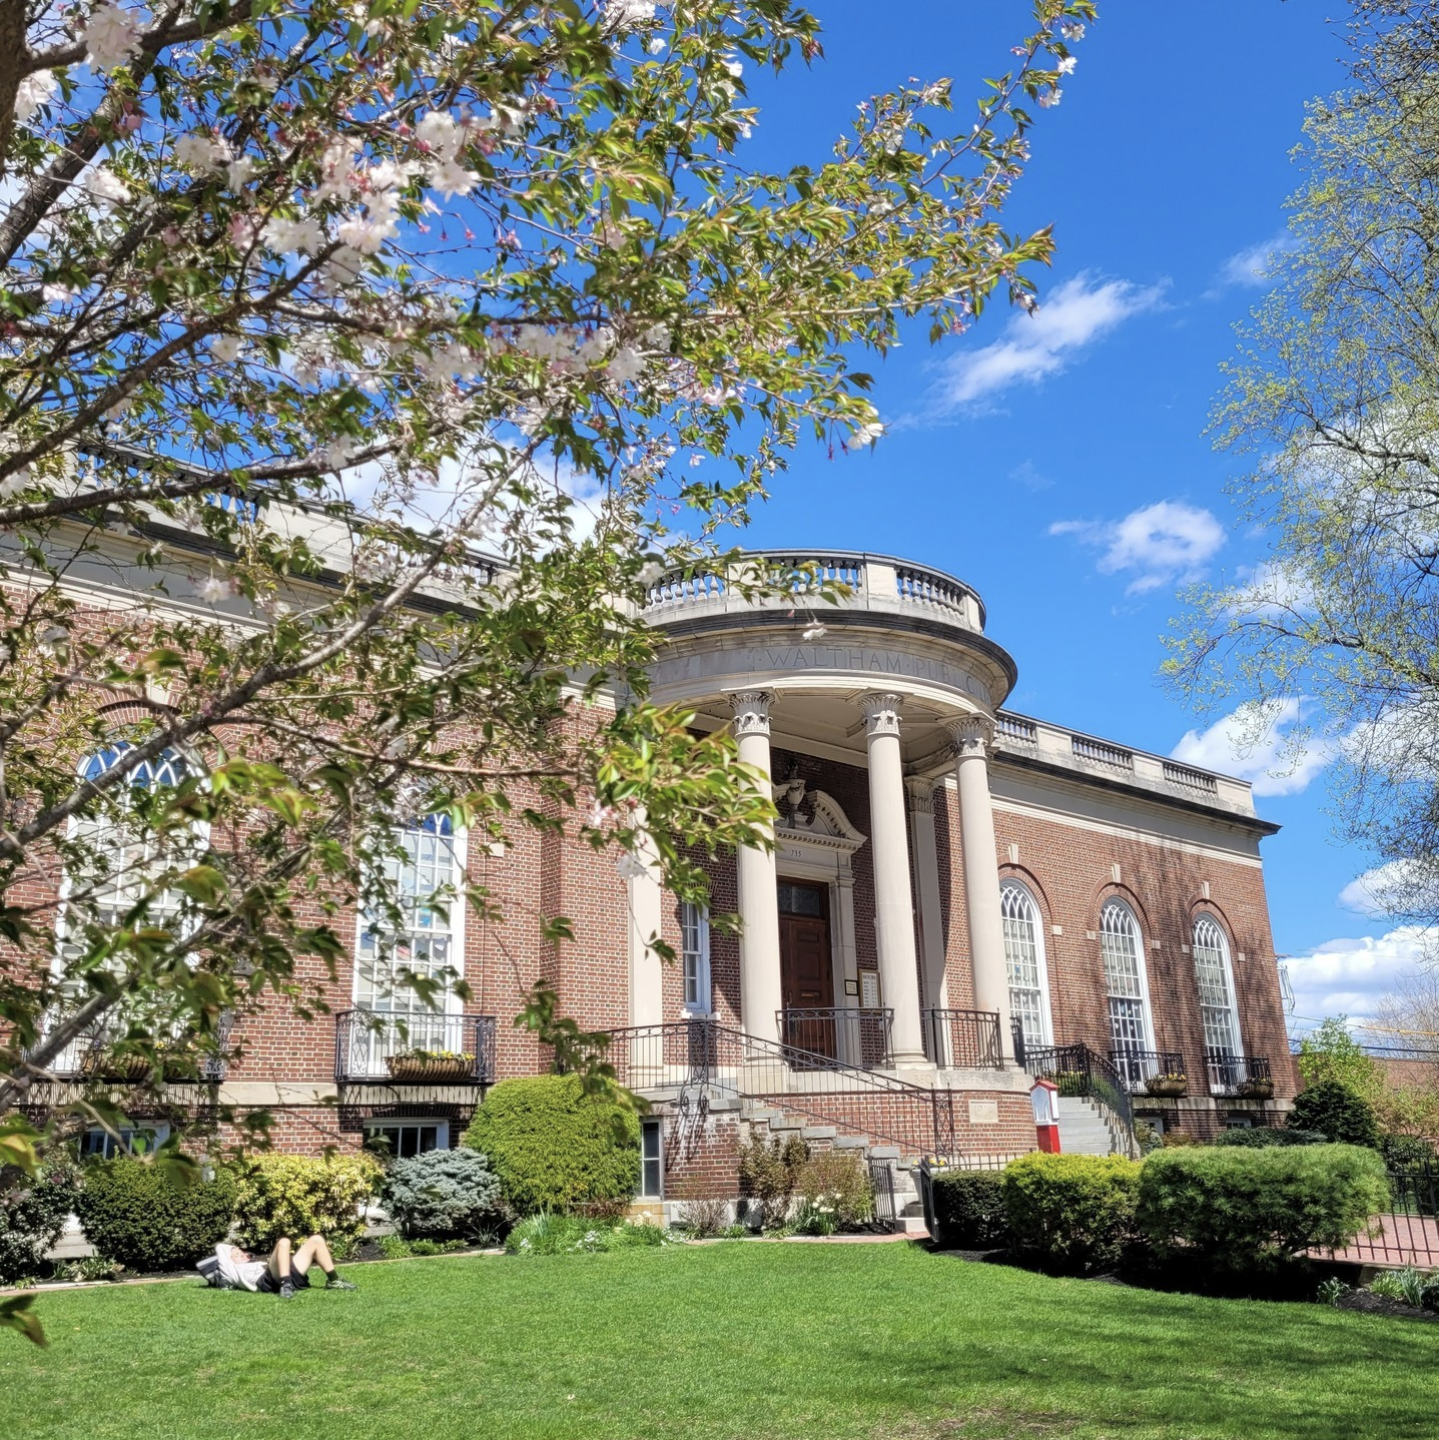 Image of exterior of Waltham Public Library